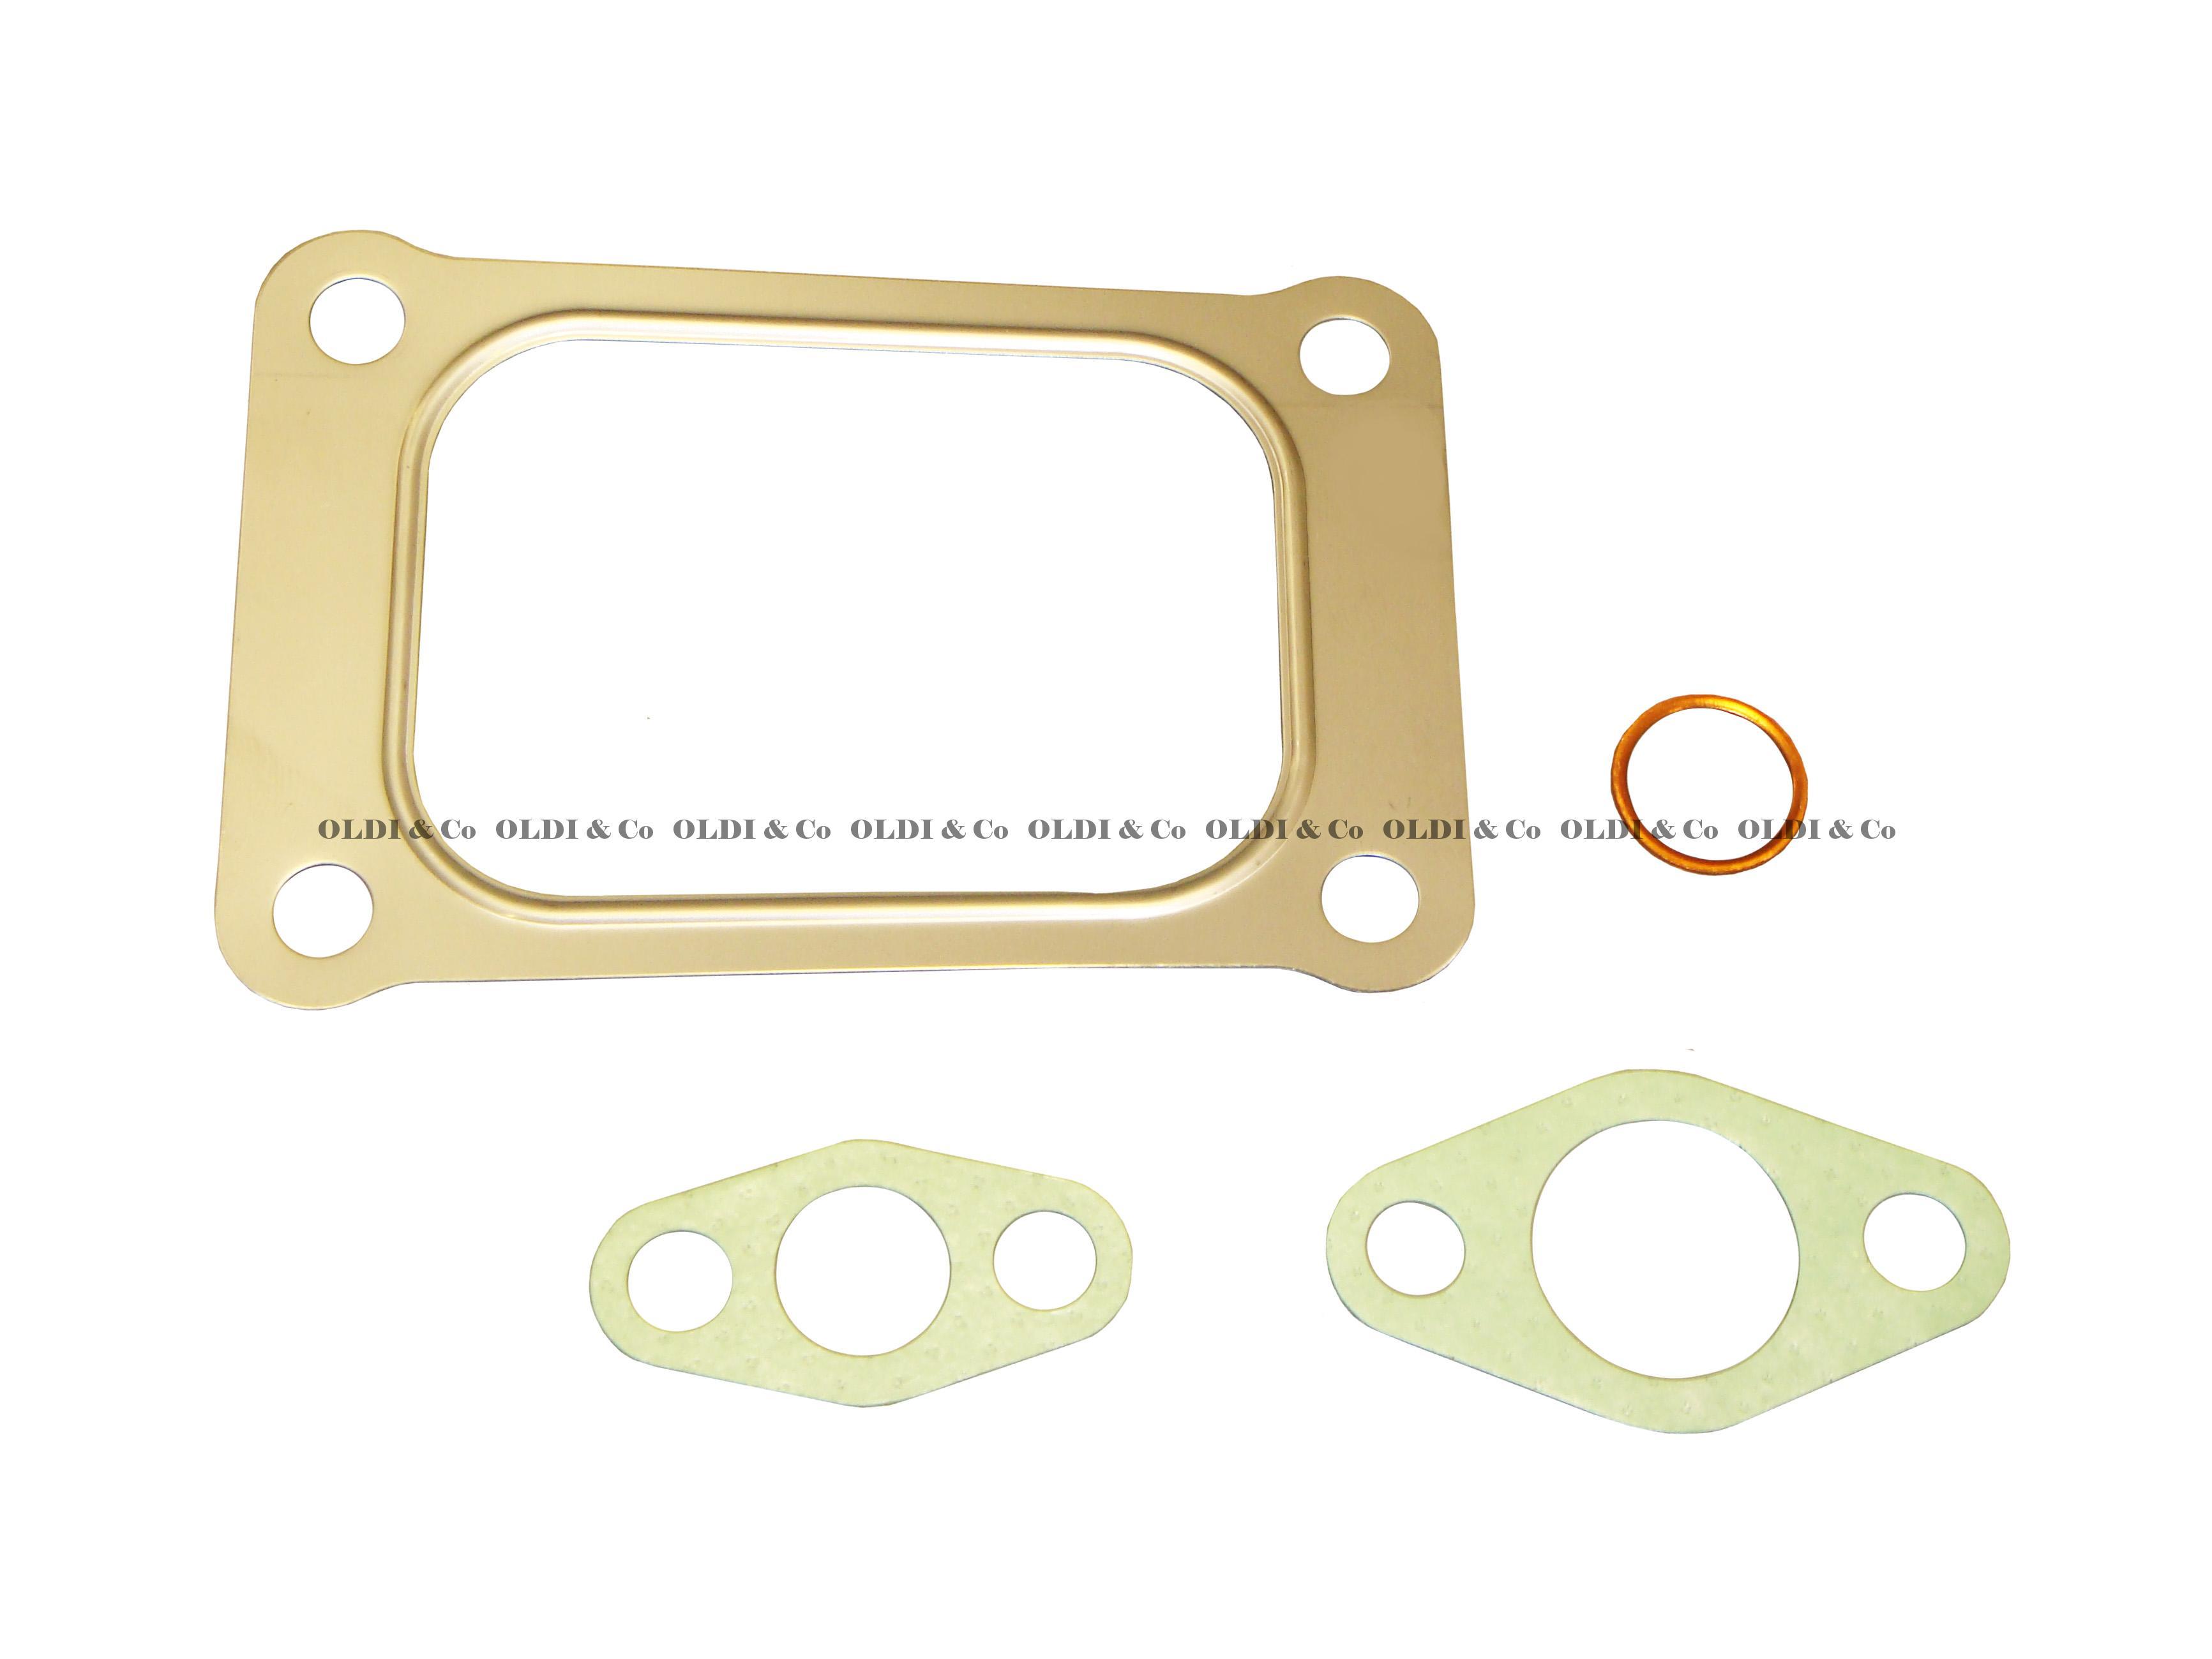 41.001.19410 Turbocompressors and their components → Gasket set